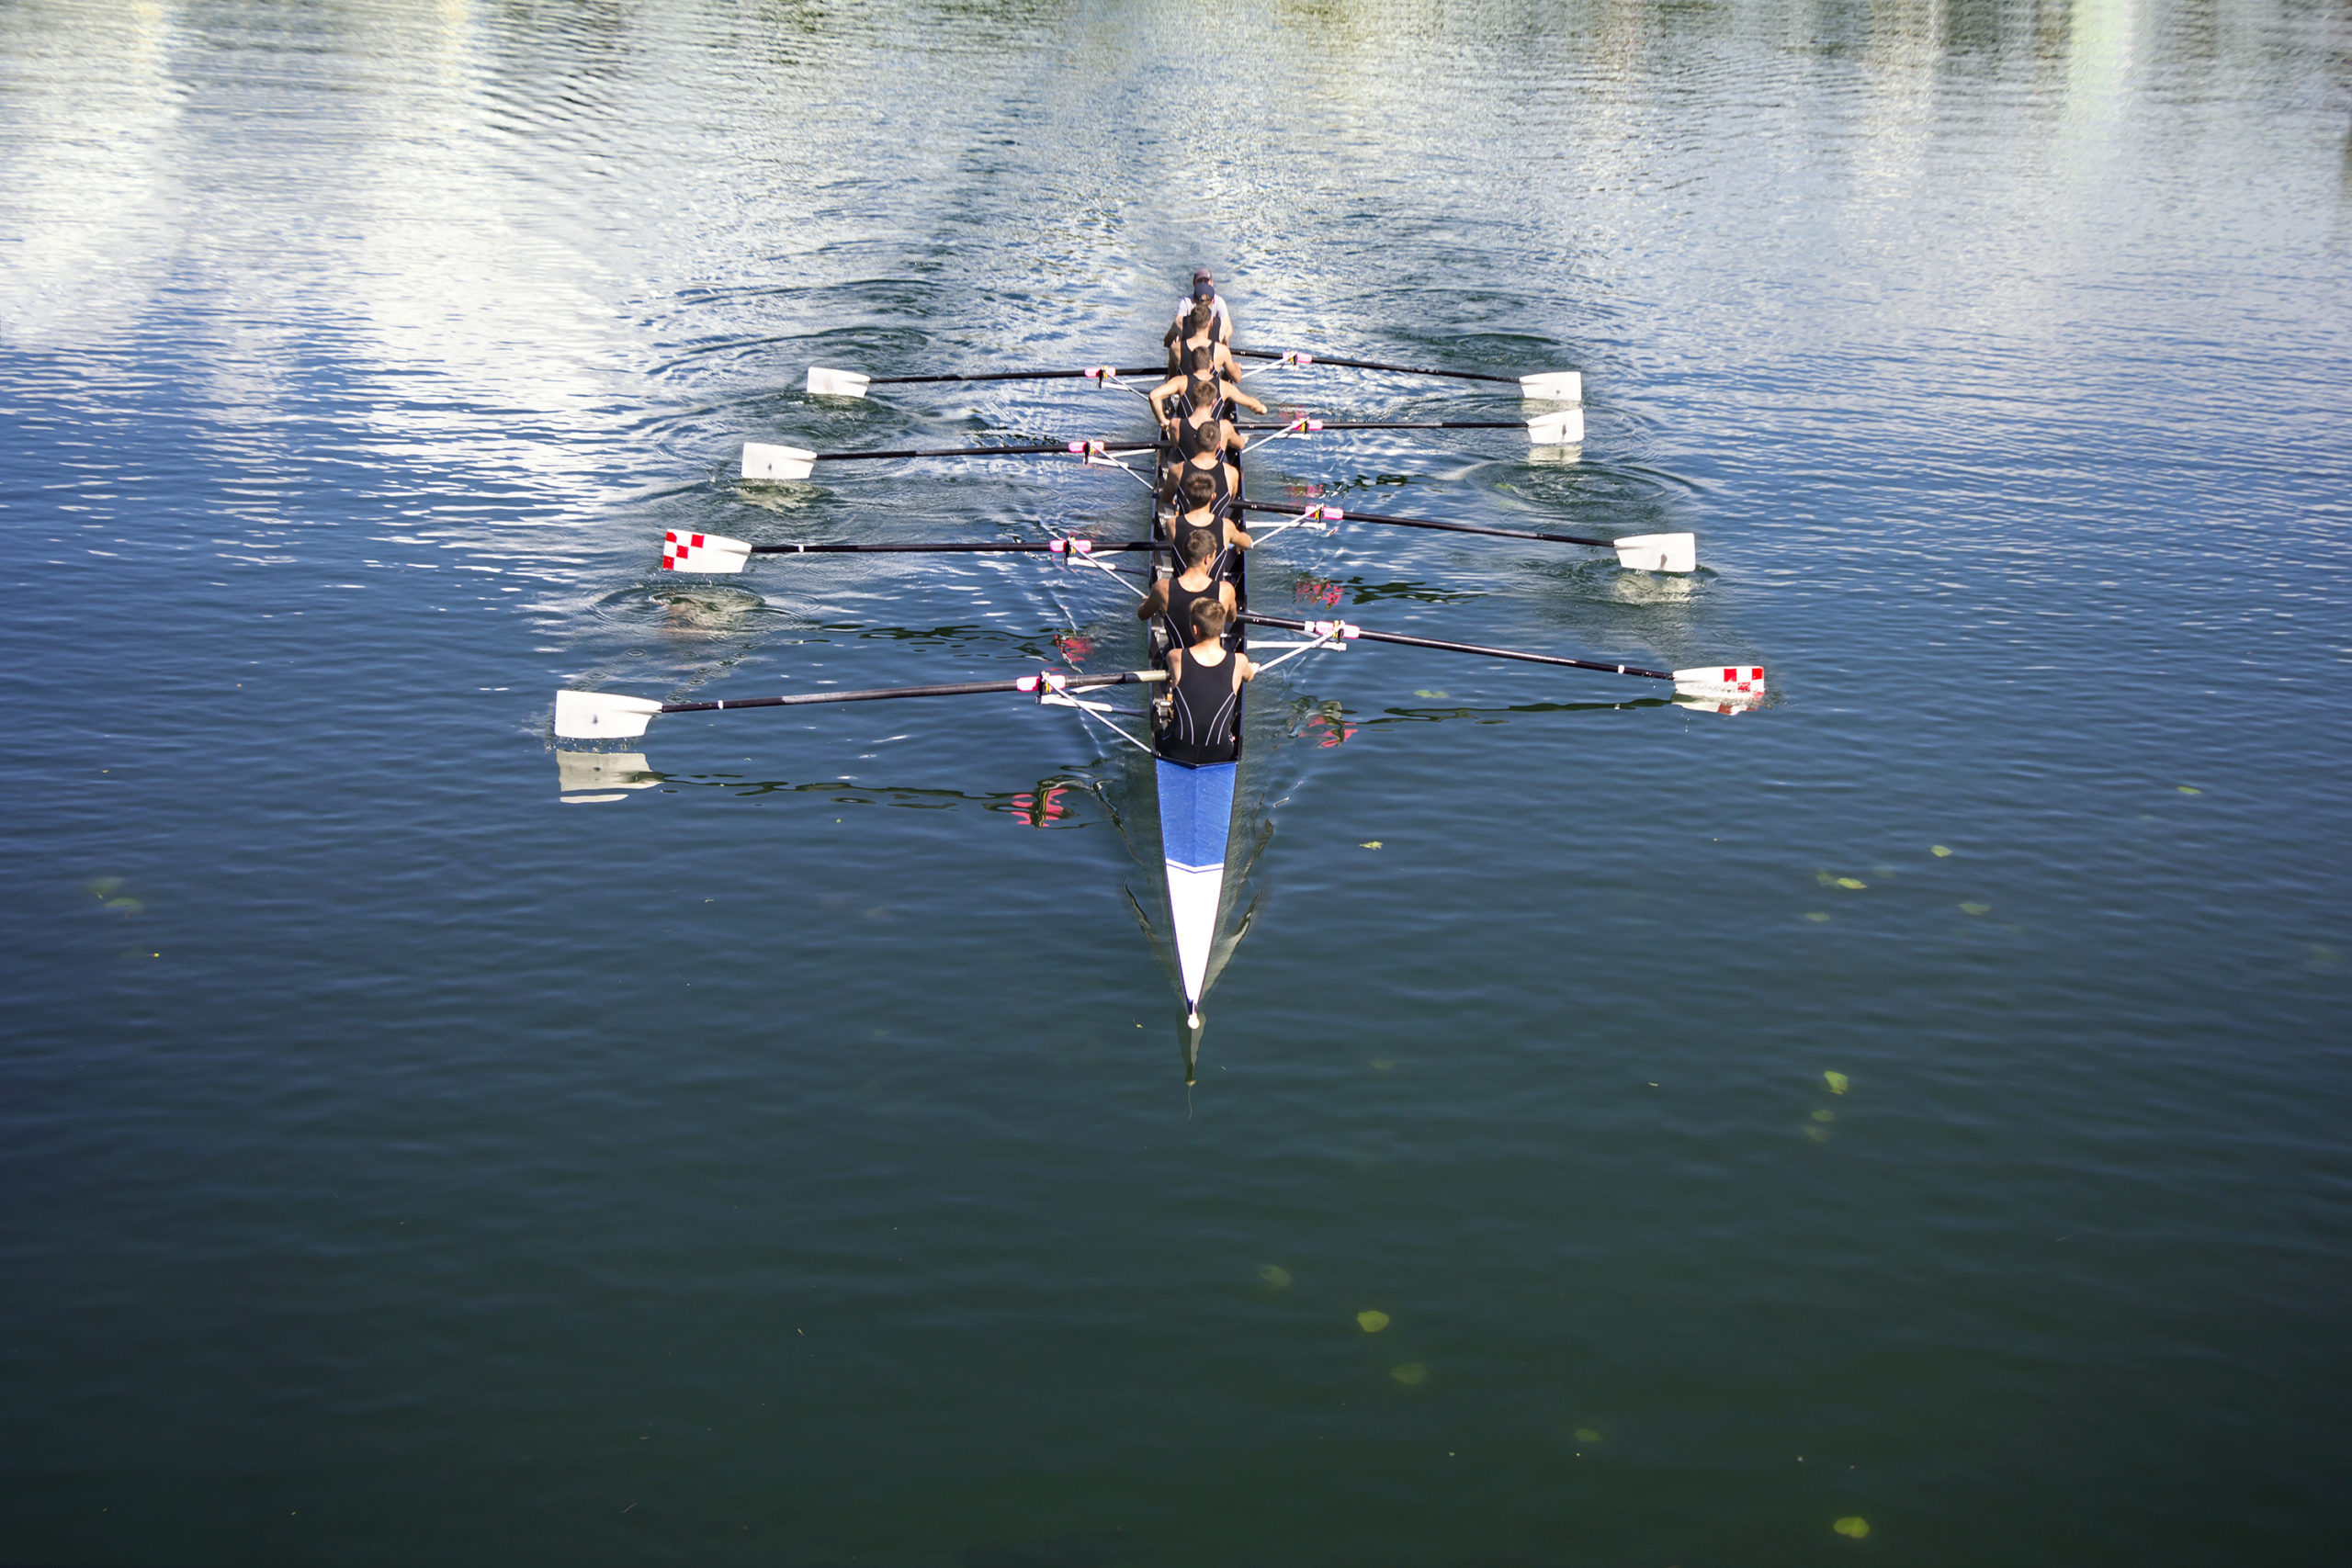 Boat coxed eight Rowers rowing on the tranquil lake